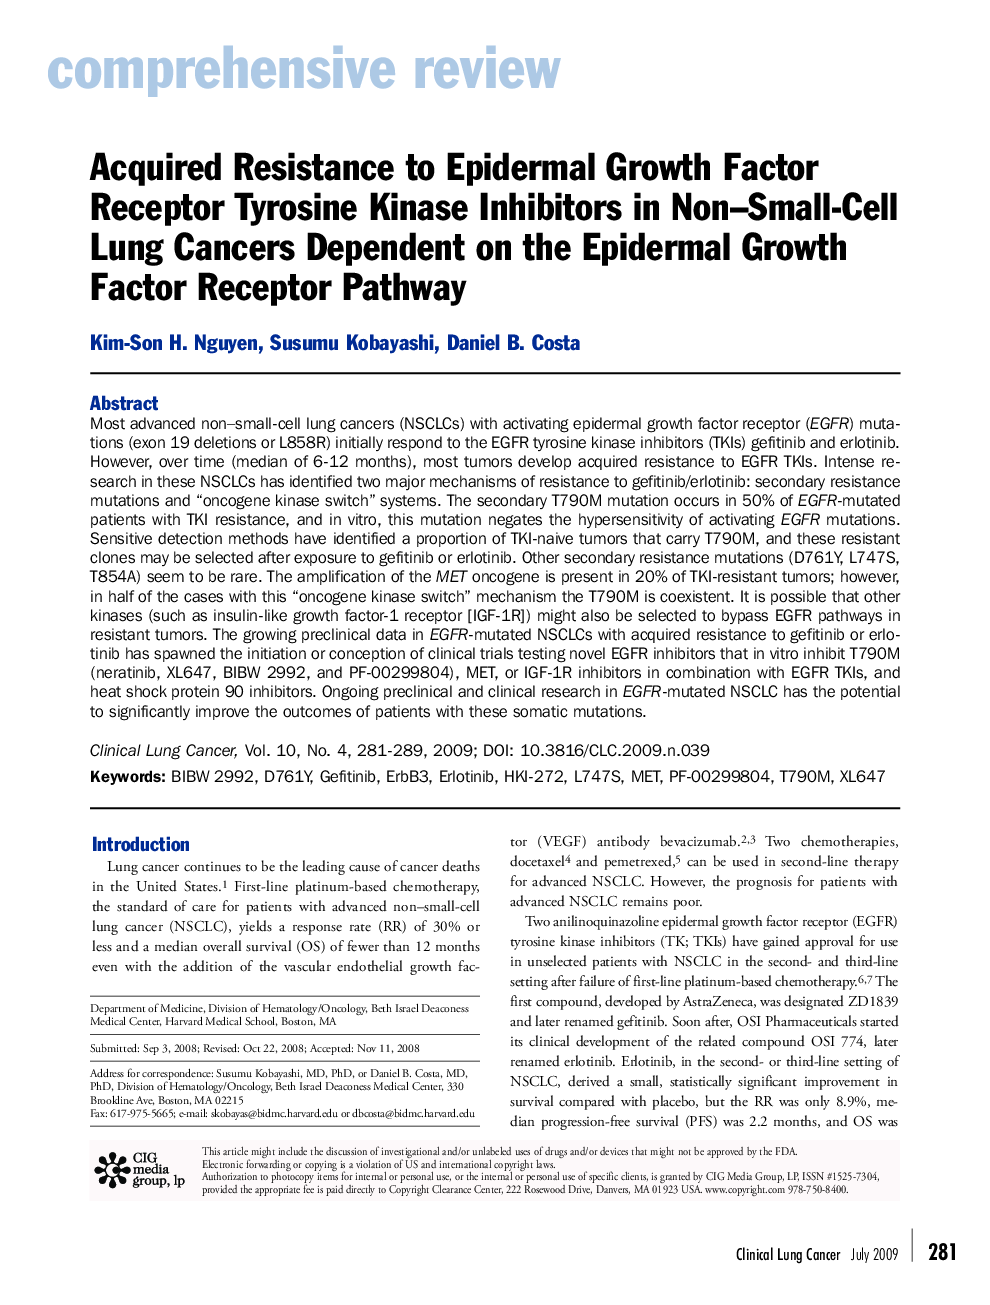 Acquired Resistance to Epidermal Growth Factor Receptor Tyrosine Kinase Inhibitors in Non–Small-Cell Lung Cancers Dependent on the Epidermal Growth Factor Receptor Pathway 